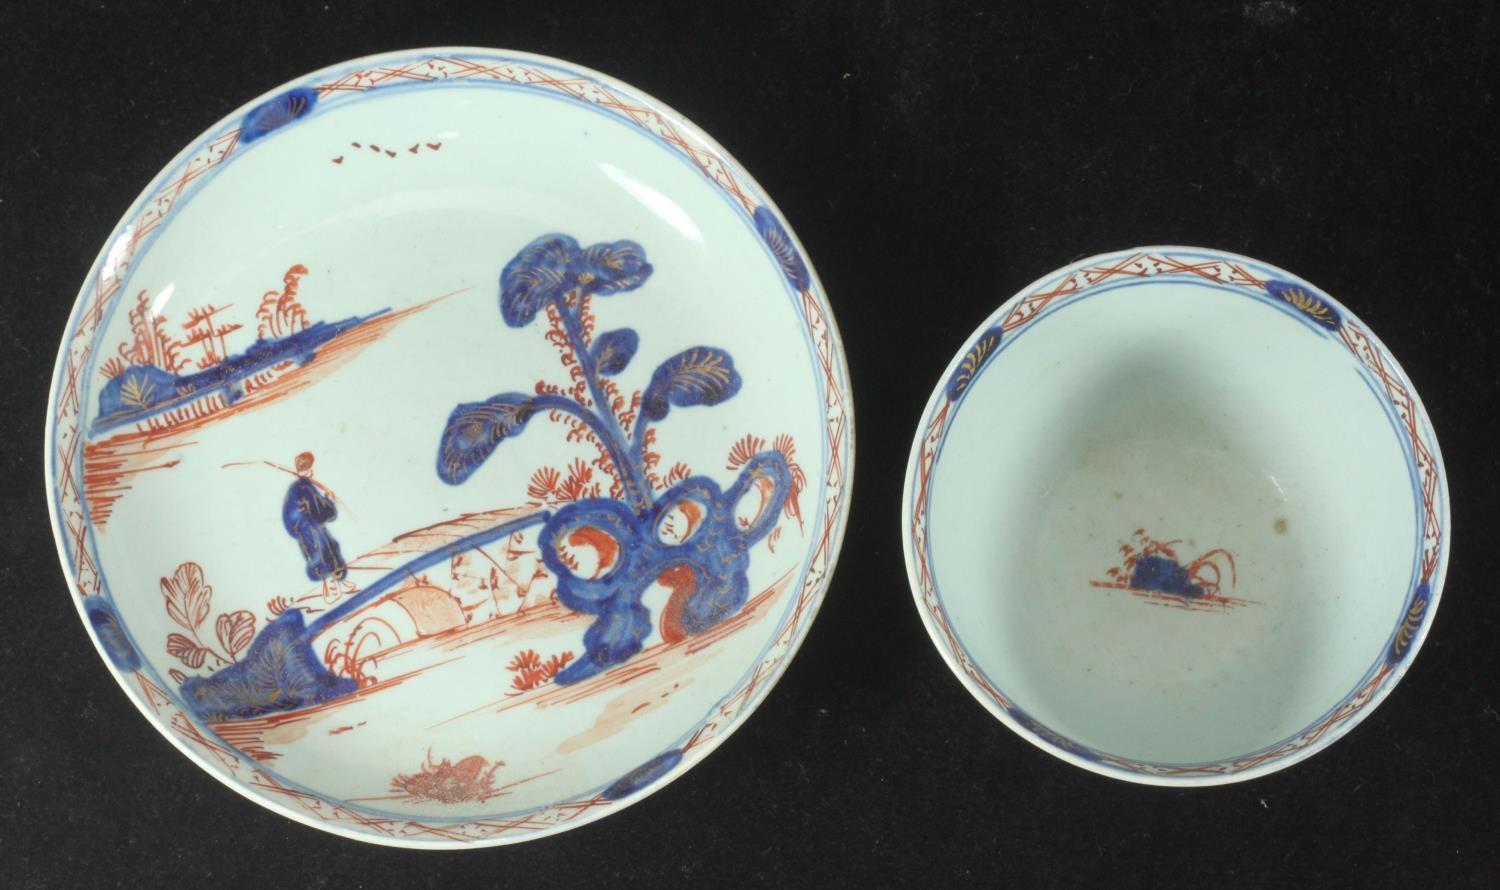 A William Ball Liverpool Porcelain tea bowl and saucer decorated with a 'man on a bridge' in - Image 2 of 3